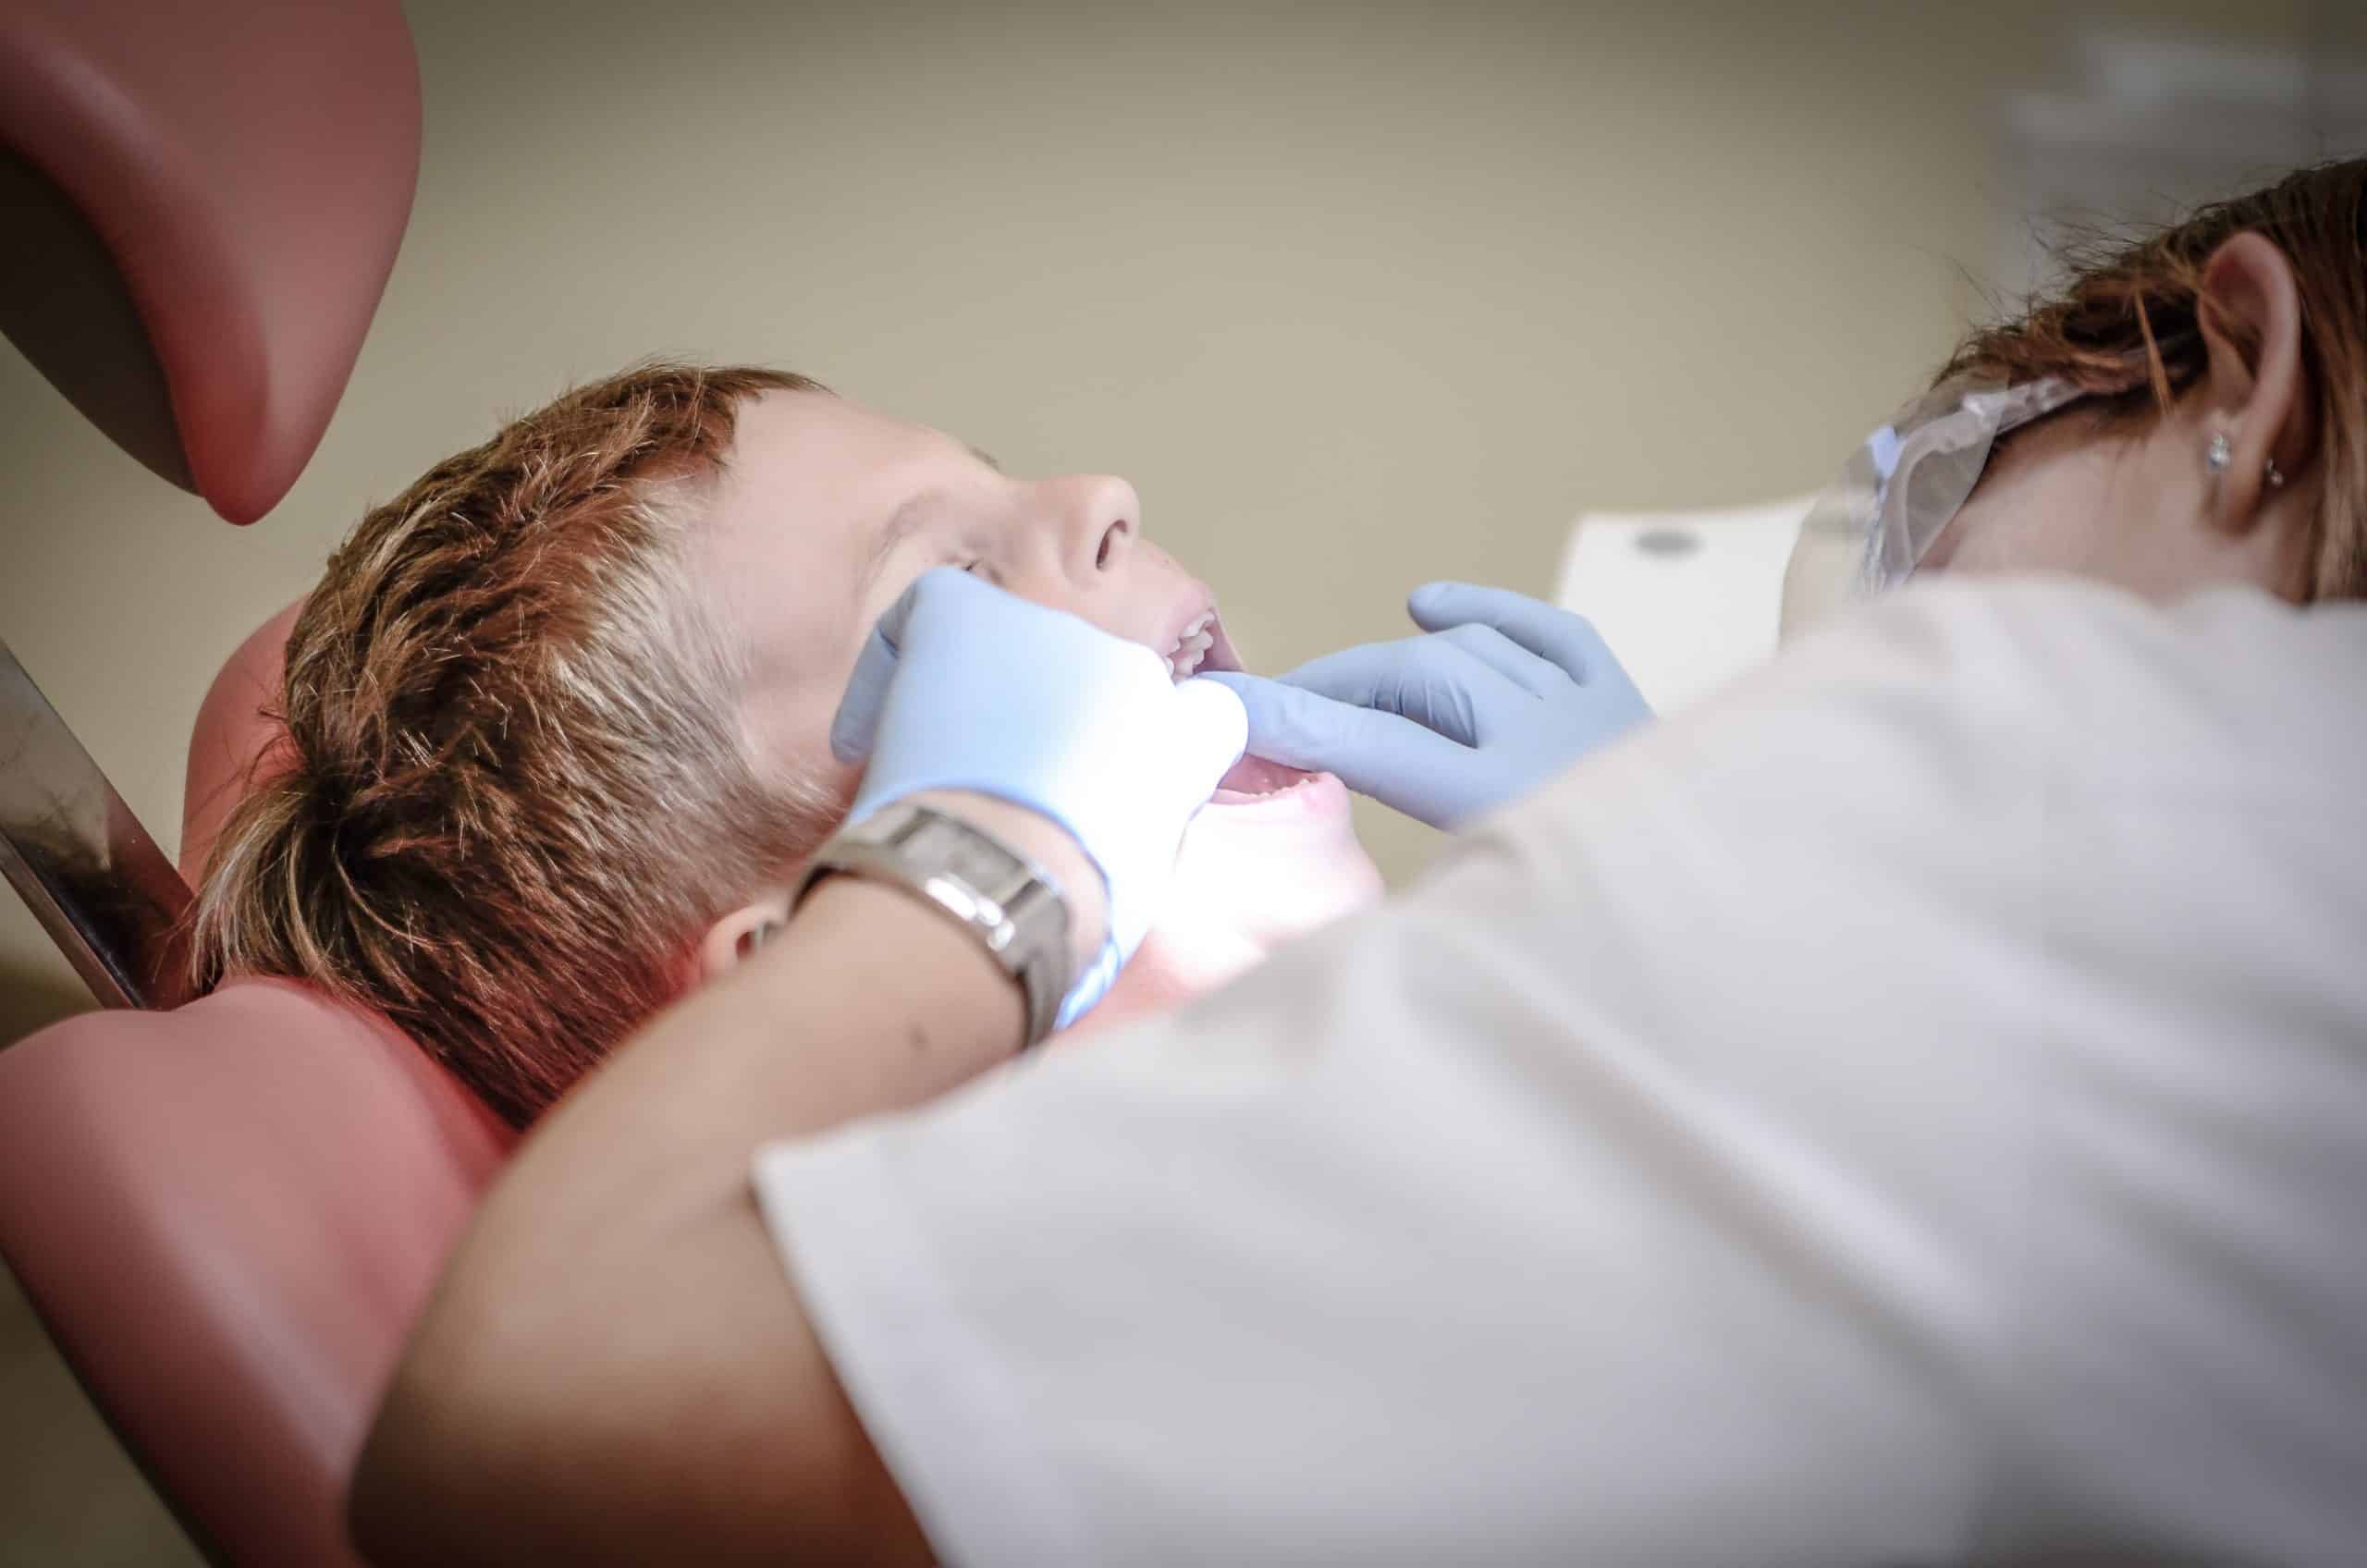 Does Cosmetic Dental Care Come Under Insurance?